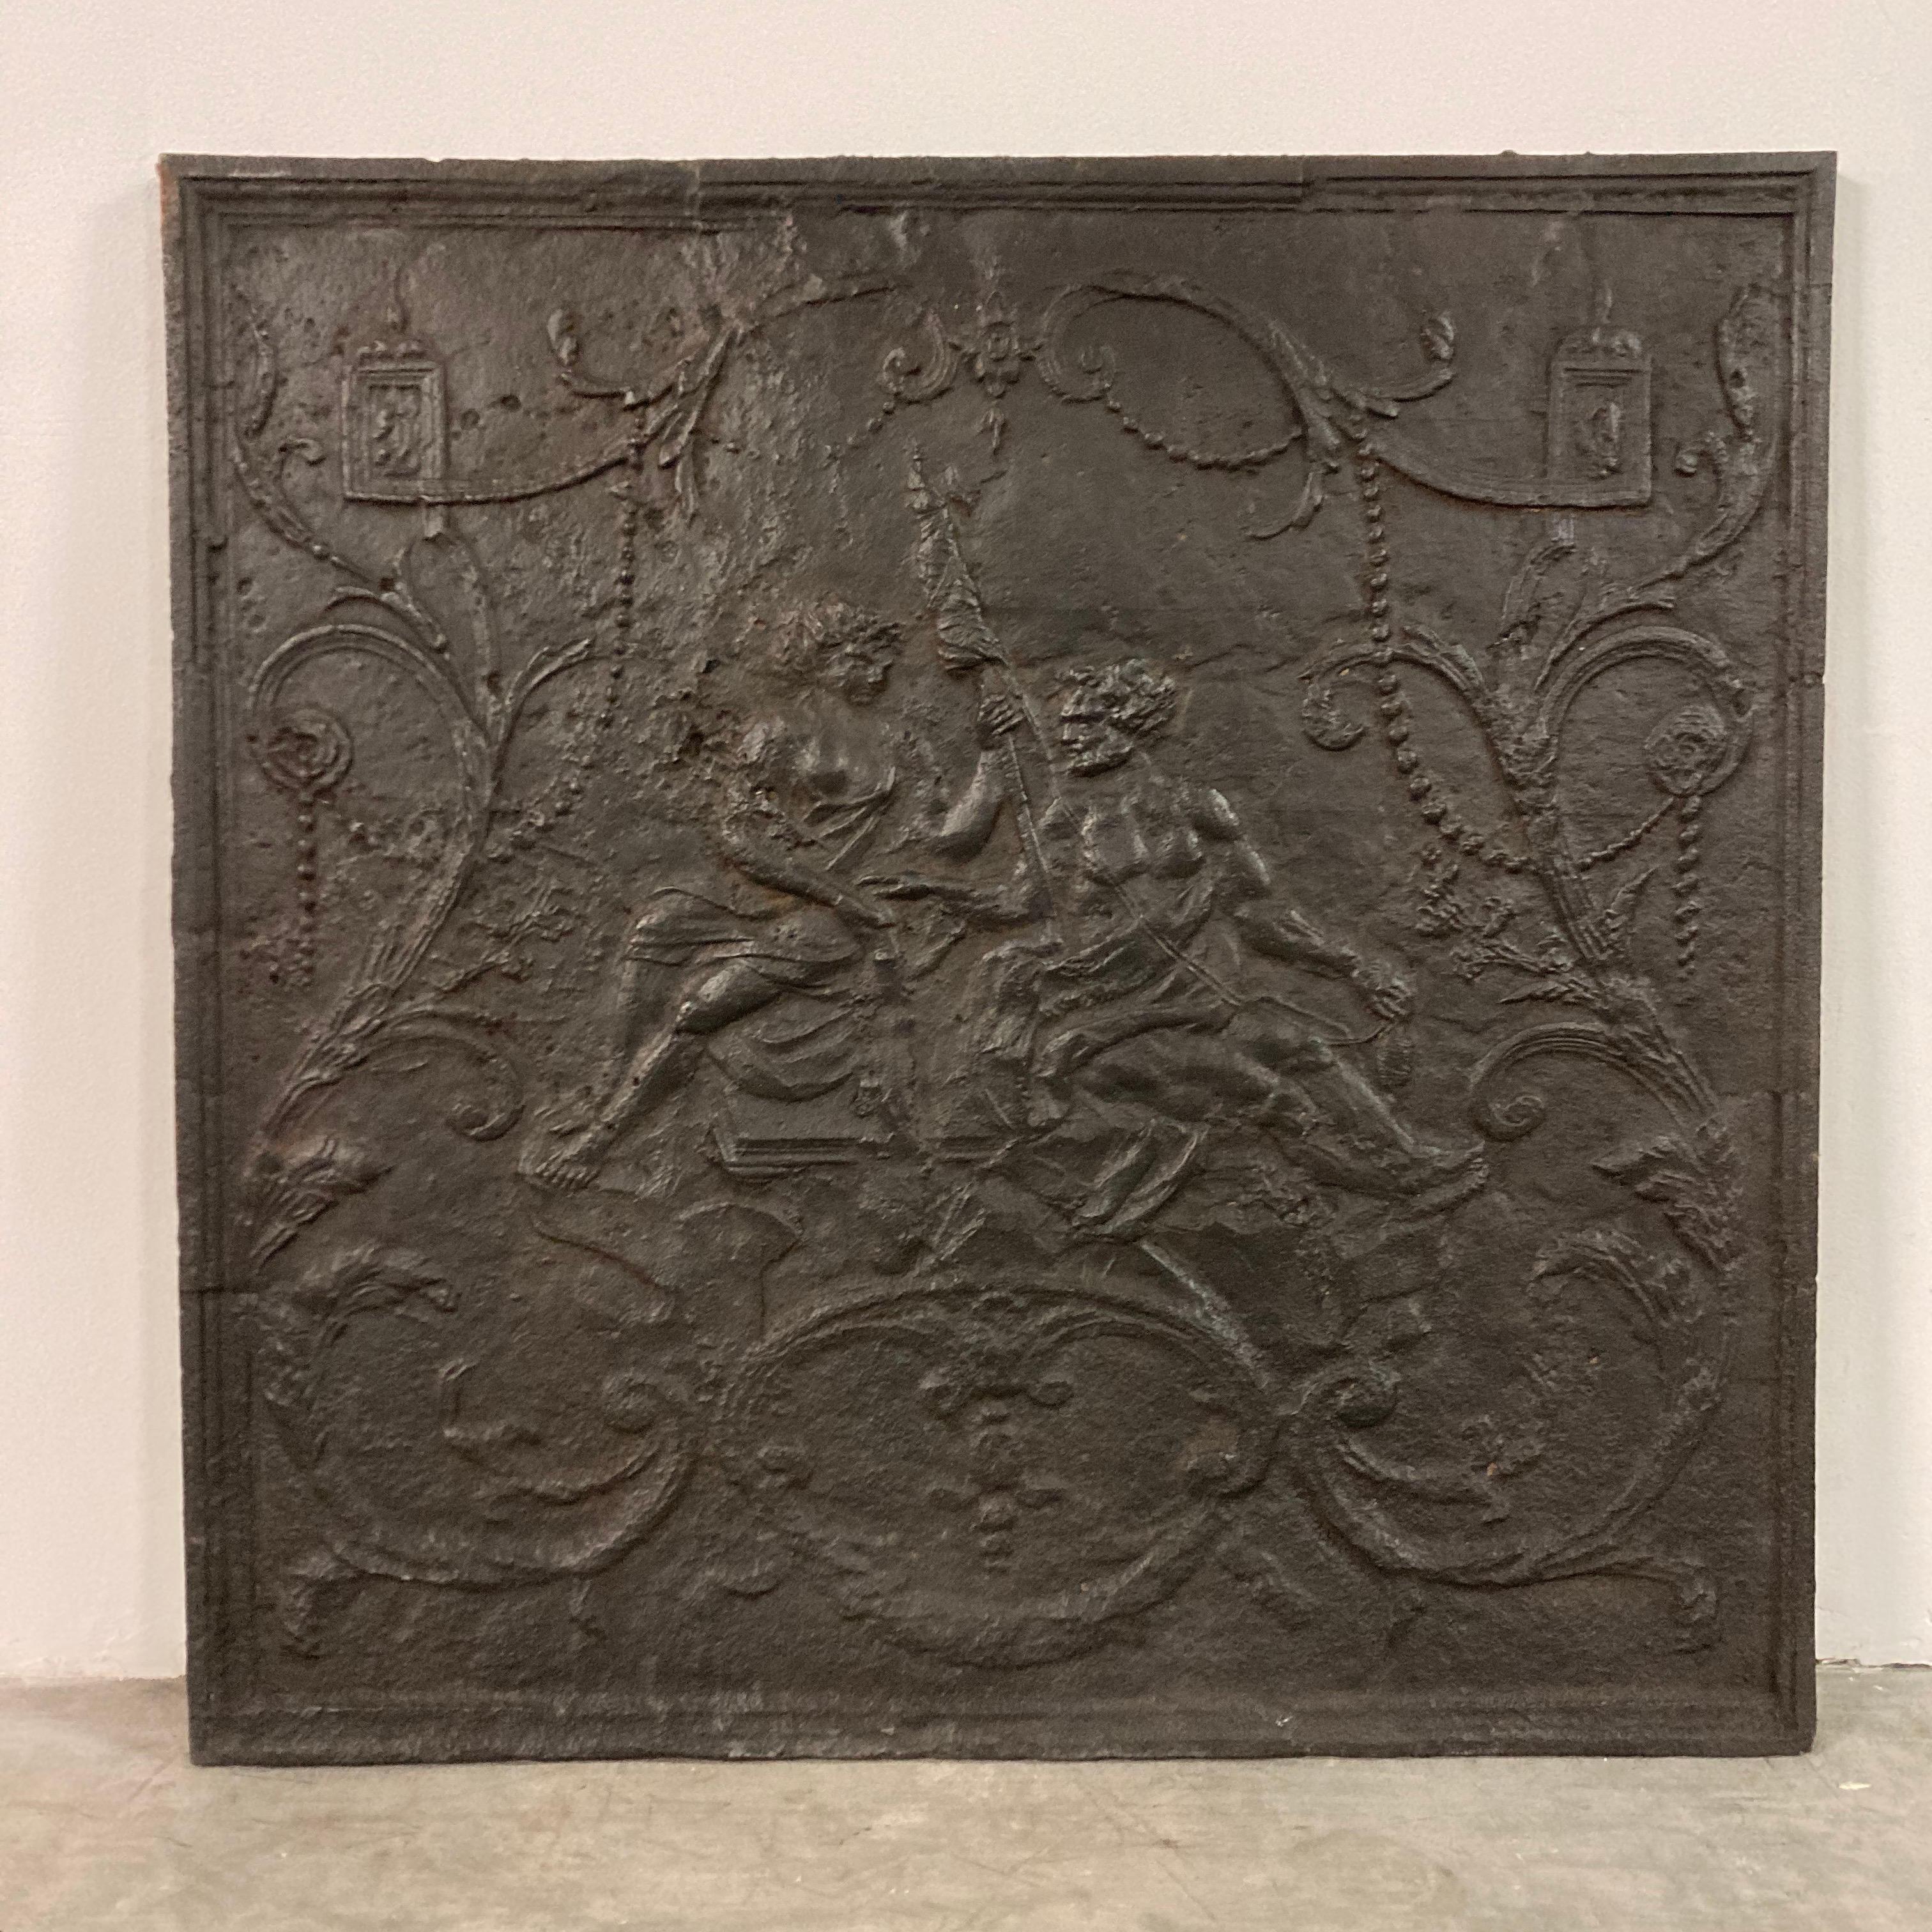 A beautiful cast iron Louis XV fireback or backsplash from the 18th century. Displaying the spell of Omphale, Queen of Lydia.
Hercules is spinning the wool, spindle and distaff in hand at Omphale's feet.

The beautiful original condition, scale